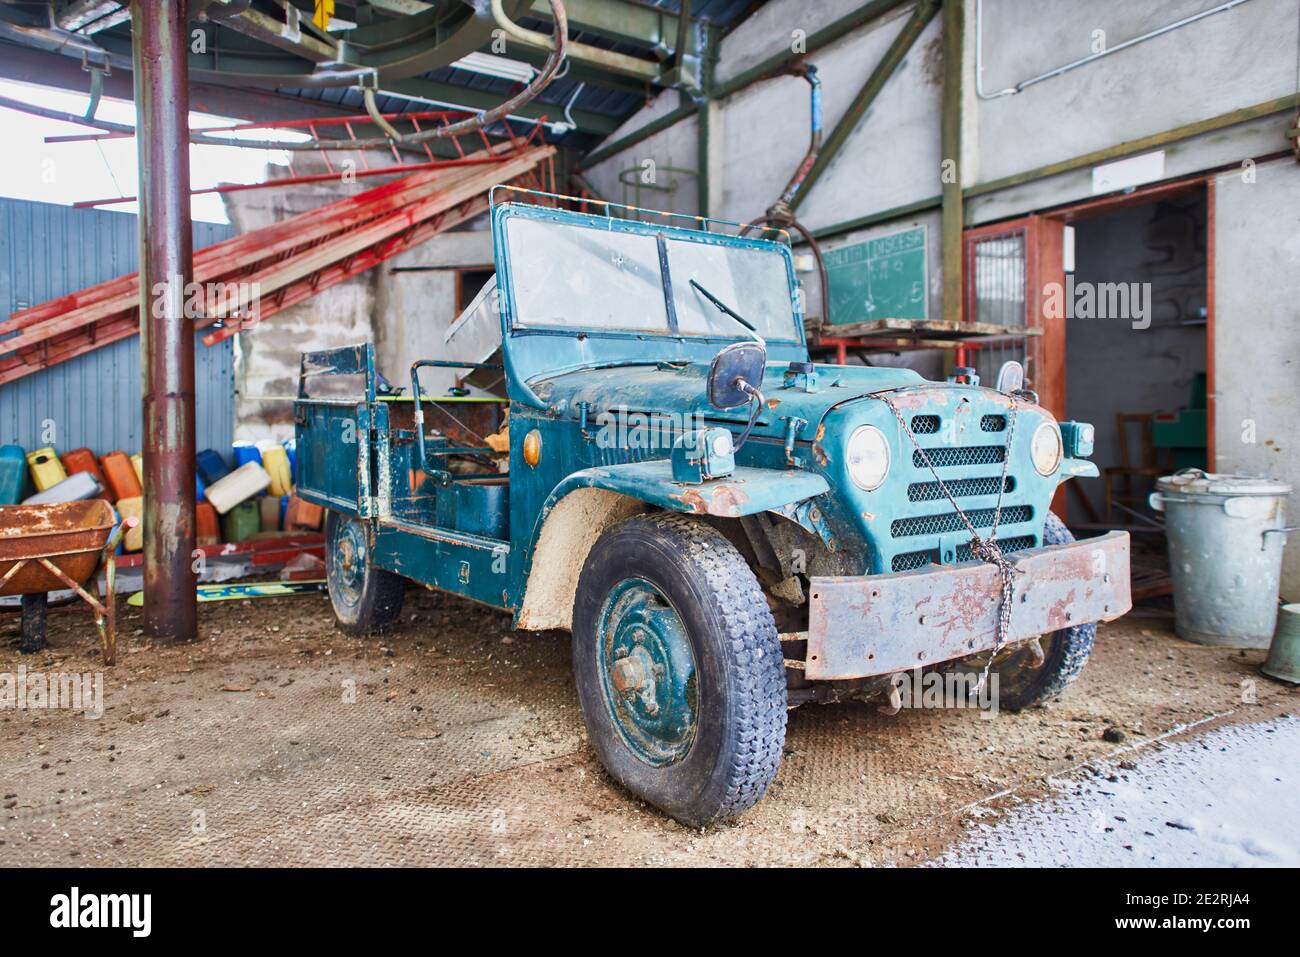 January 6, 2021: Historic off-road vehicle: Fiat Campagnola with Alfa Romeo engine In old remittance depot Stock Photo